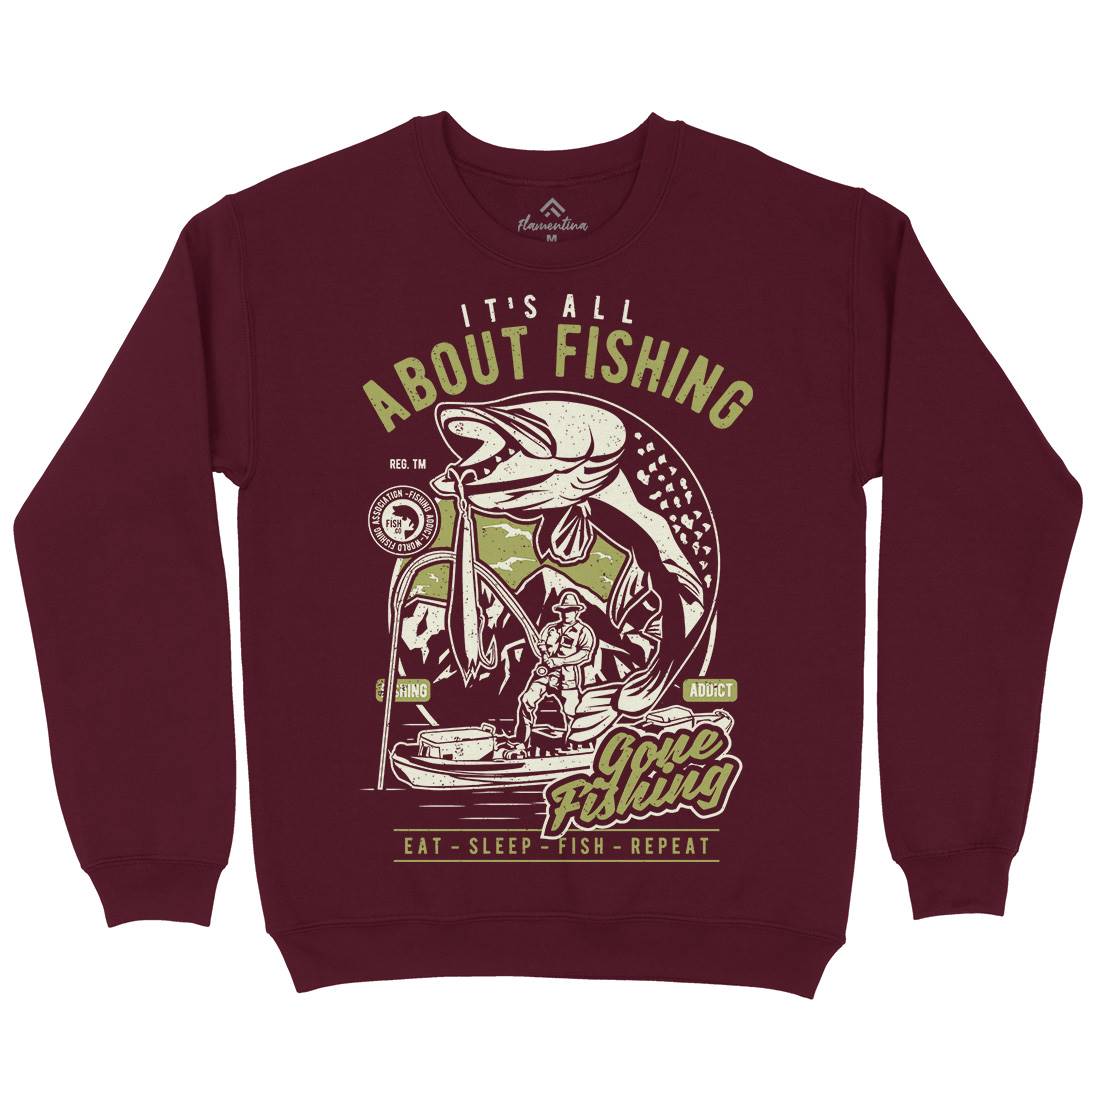 All About Kids Crew Neck Sweatshirt Fishing A604